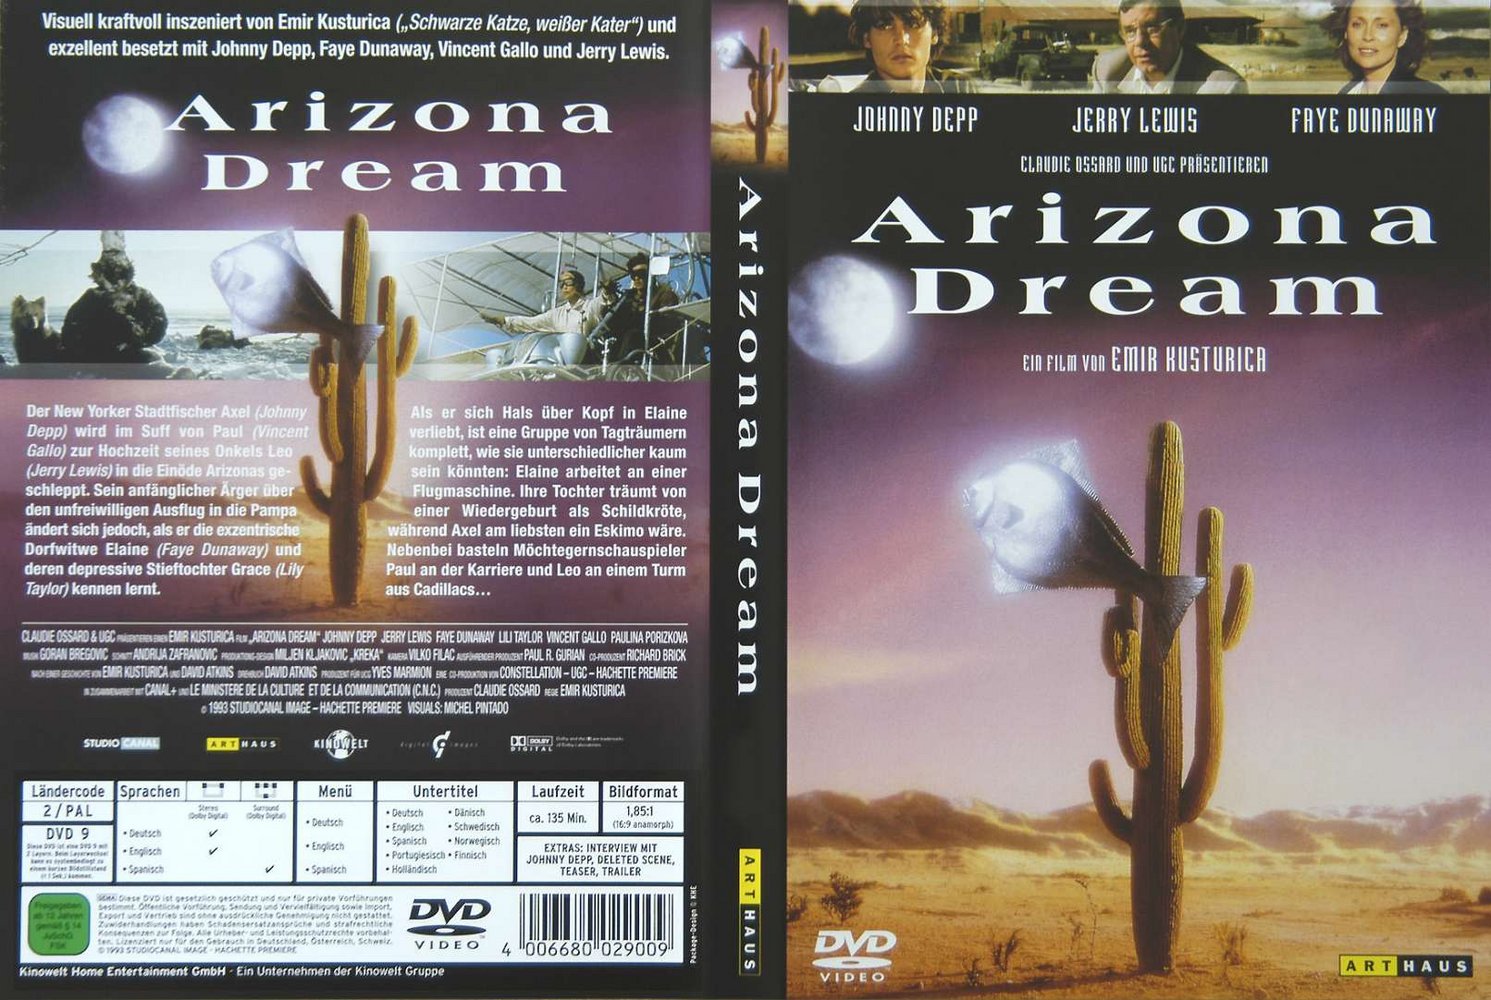 Click to view full size image -  DVD Cover - A - DVD - ARIZONA DREAM.jpg - DVD - ARIZONA DREAM.jpg